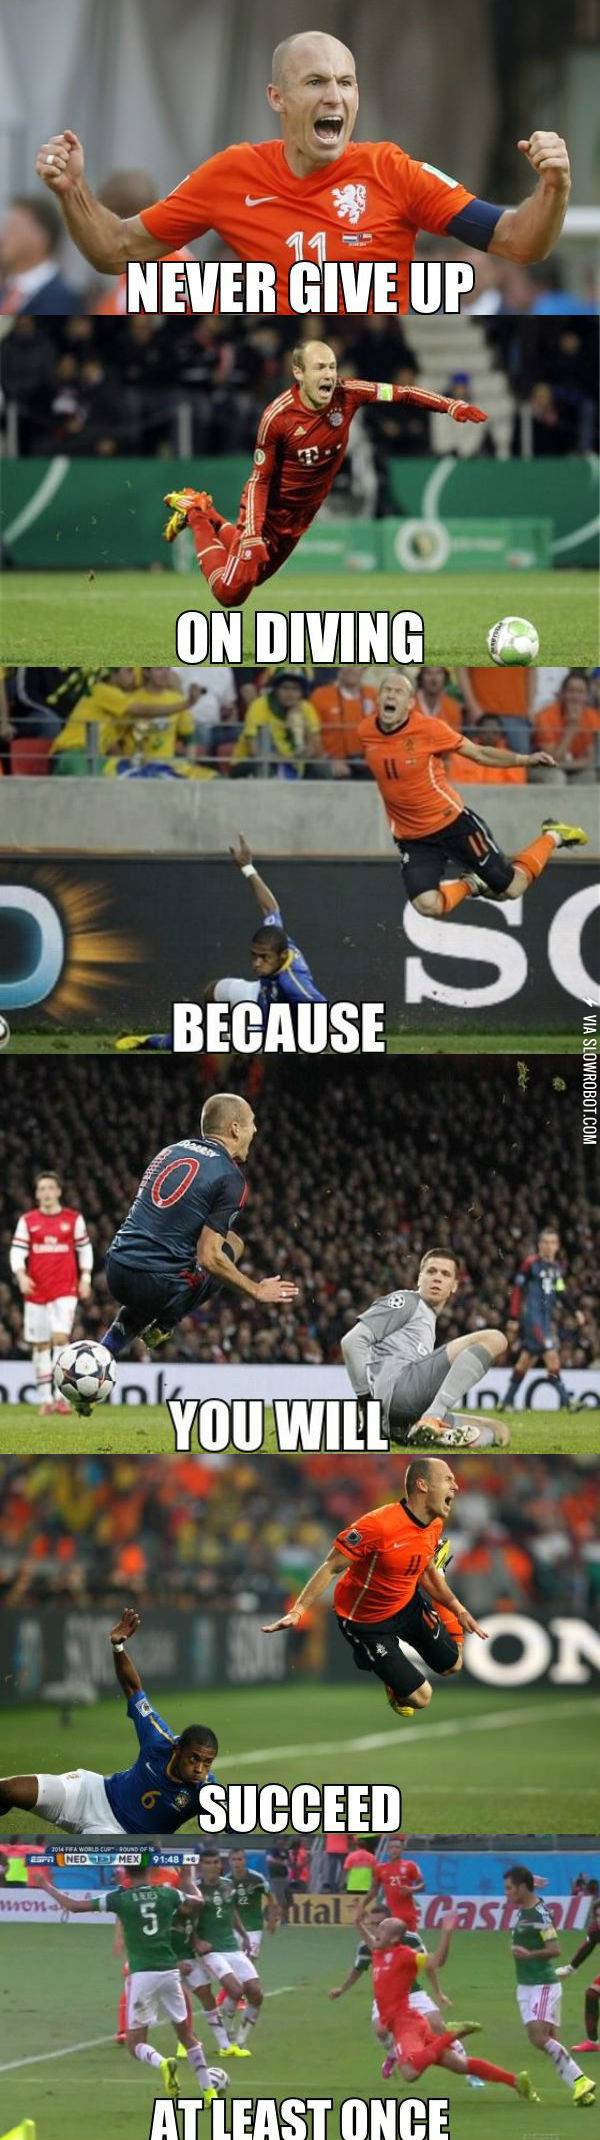 Lessons+from+Robben.